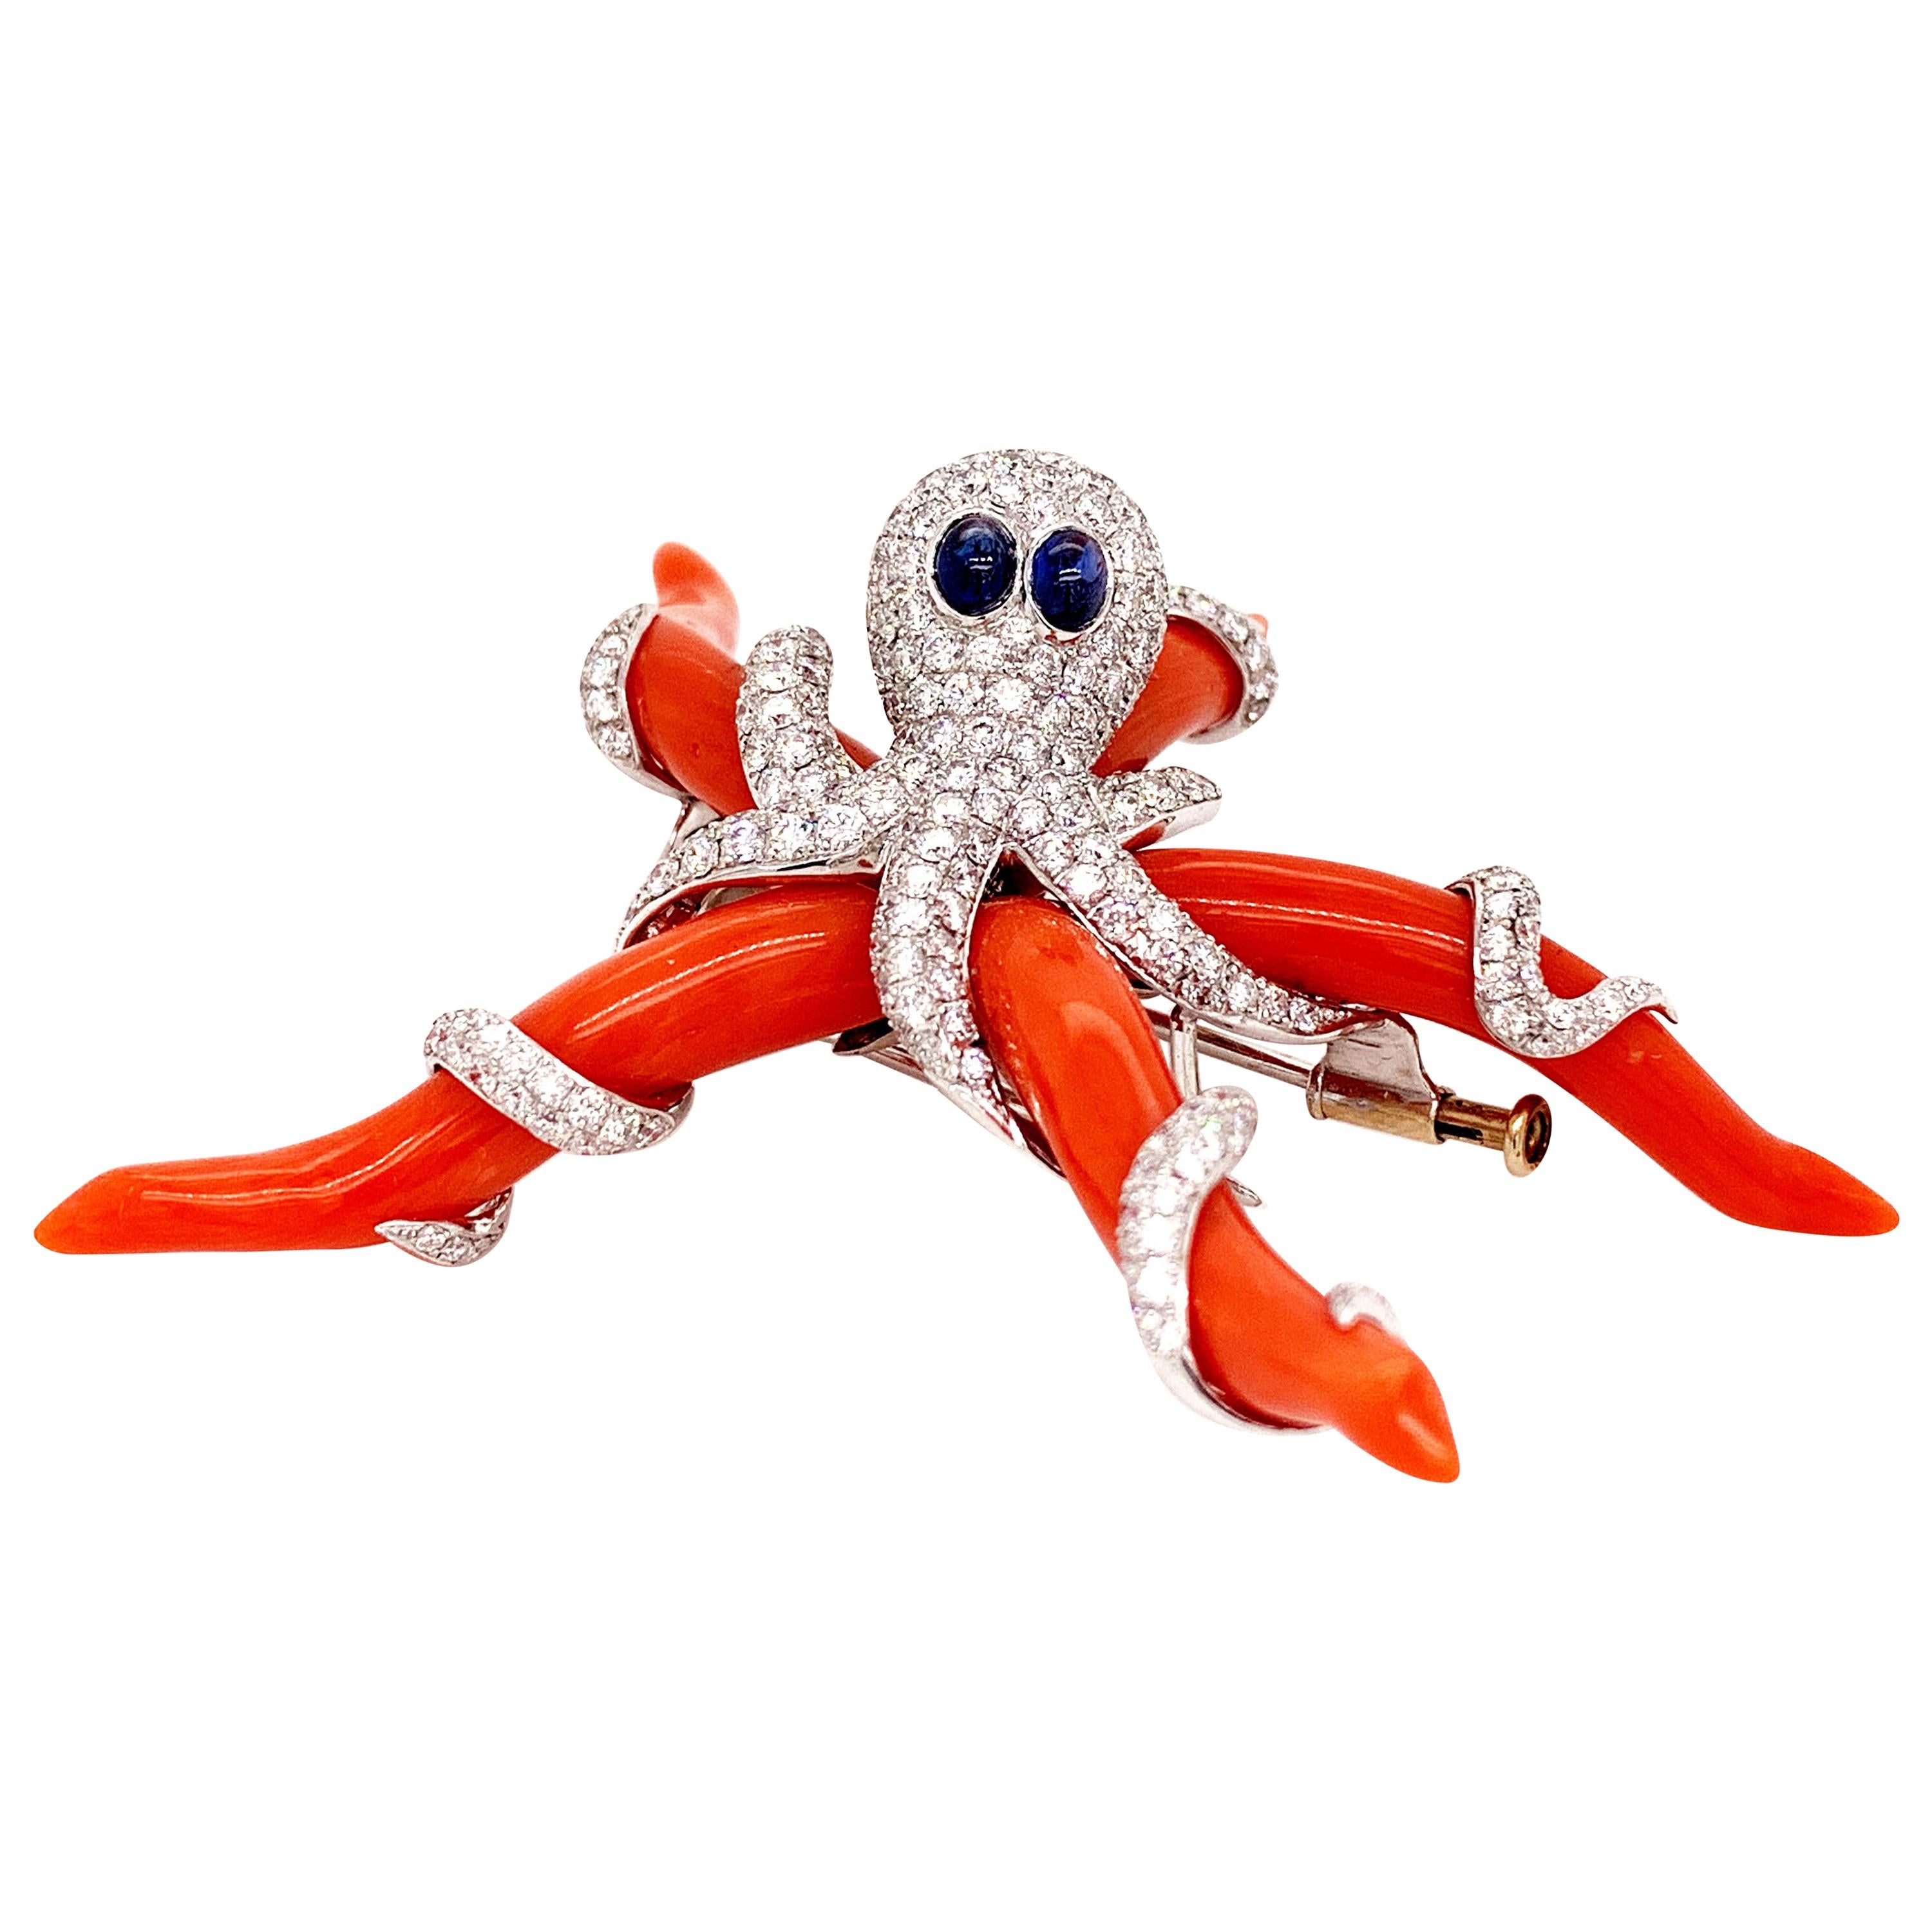 Sophia D, 39.12 Carat Octopus Coral Brooch with Diamond and Sapphire